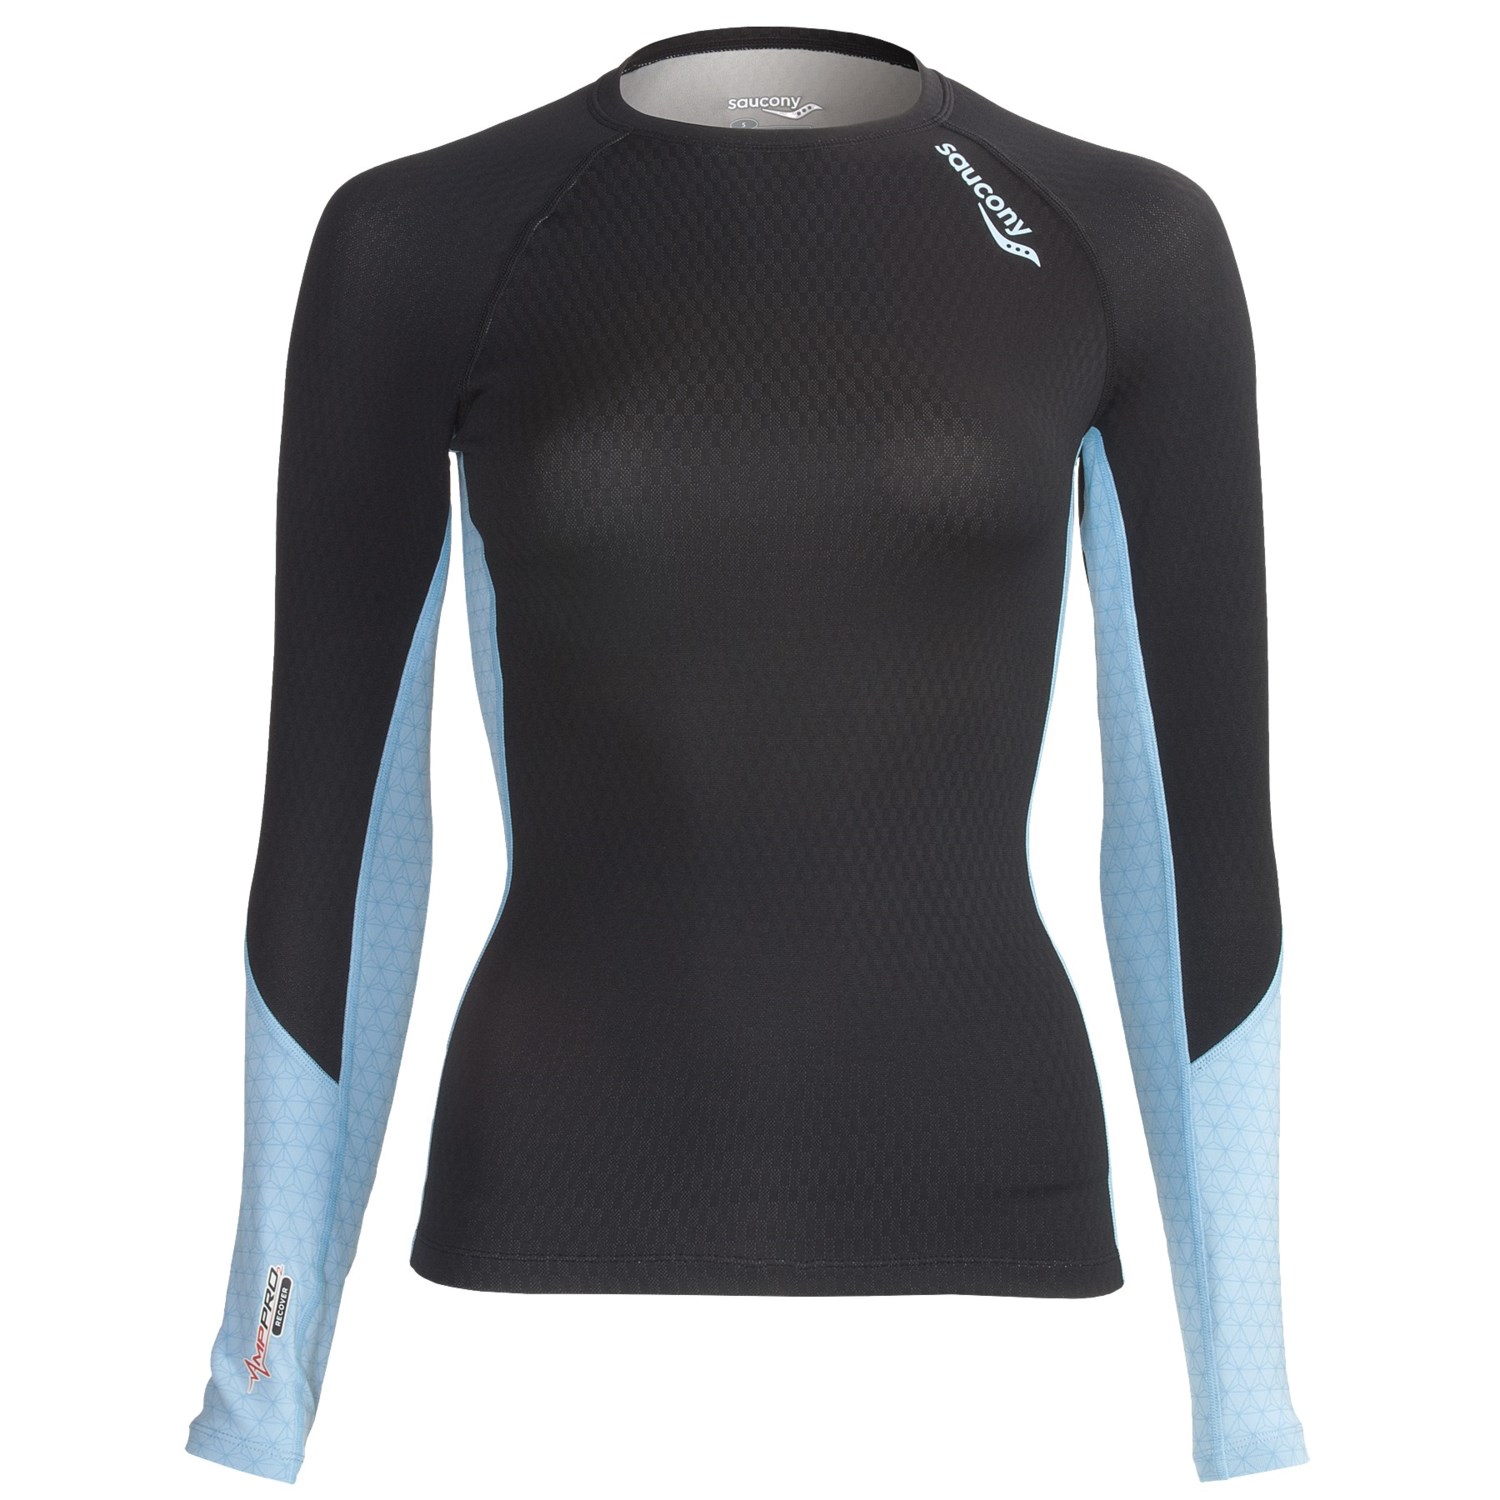 Saucony Amp Pro2 Recovery Compression Shirt (For Women) 5762M - Save 45%